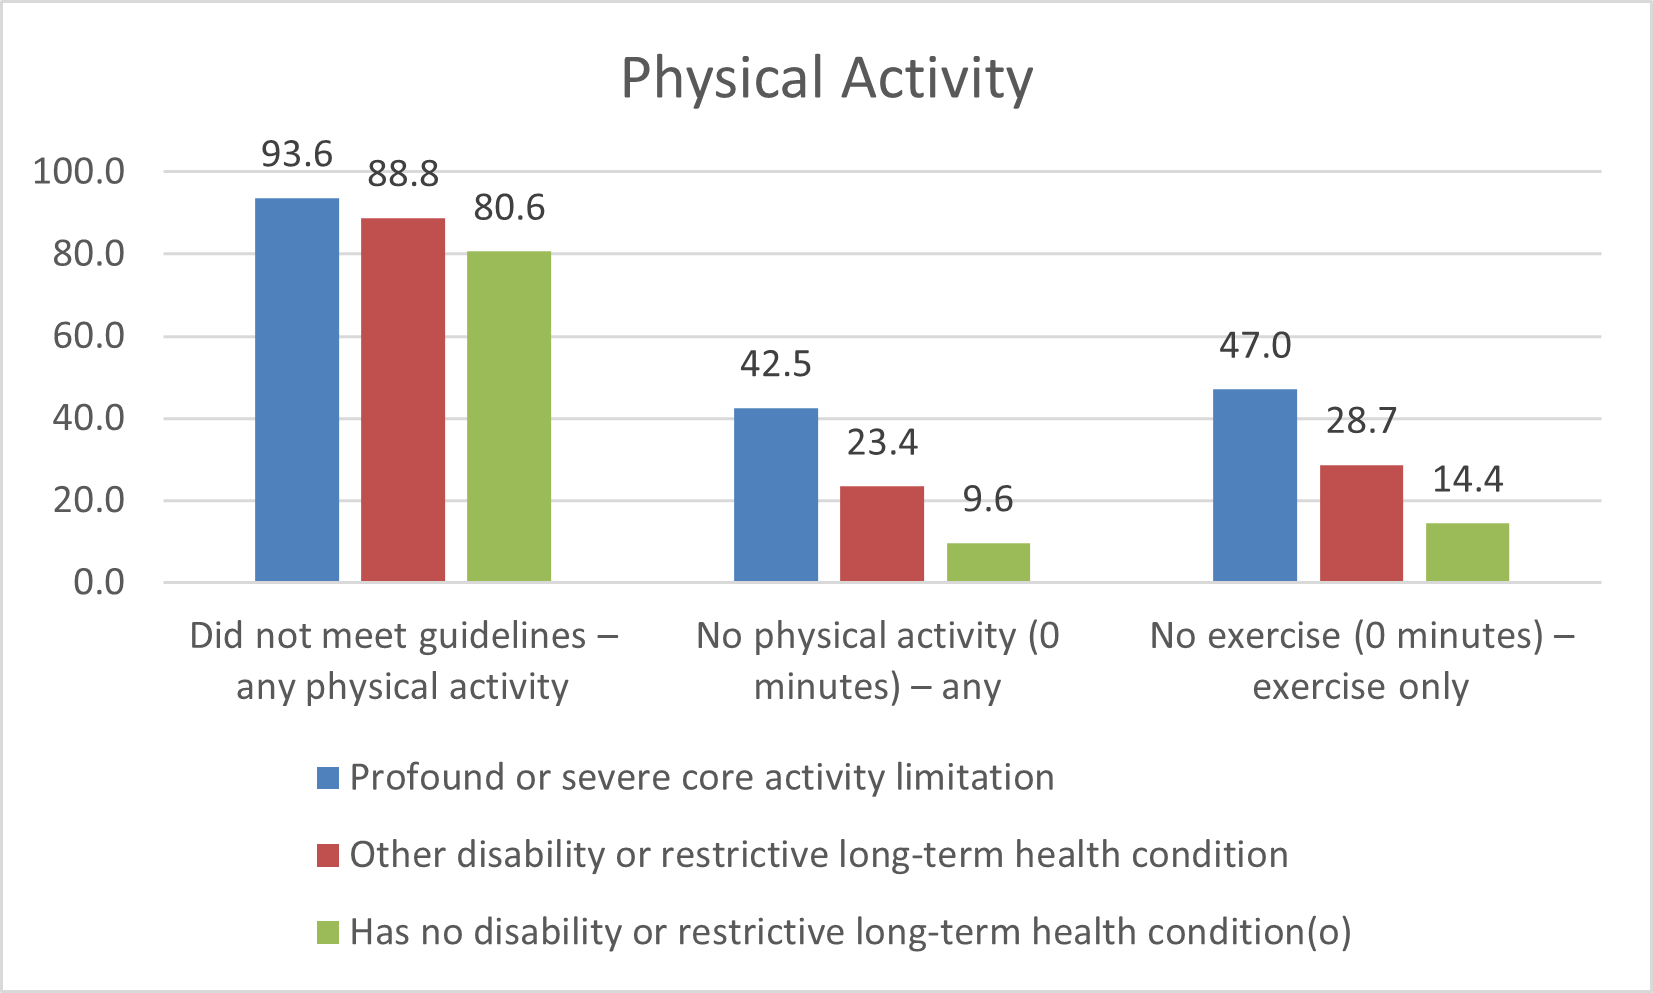 Graph showing physical activity participation and the percentage of people meeting physical activity guidelines and or not participating in any physical activity or exercise. The comparisons show that increasing severity of disability equals less physical activity, exercise, and likelihood of not meeting PA guidelines.